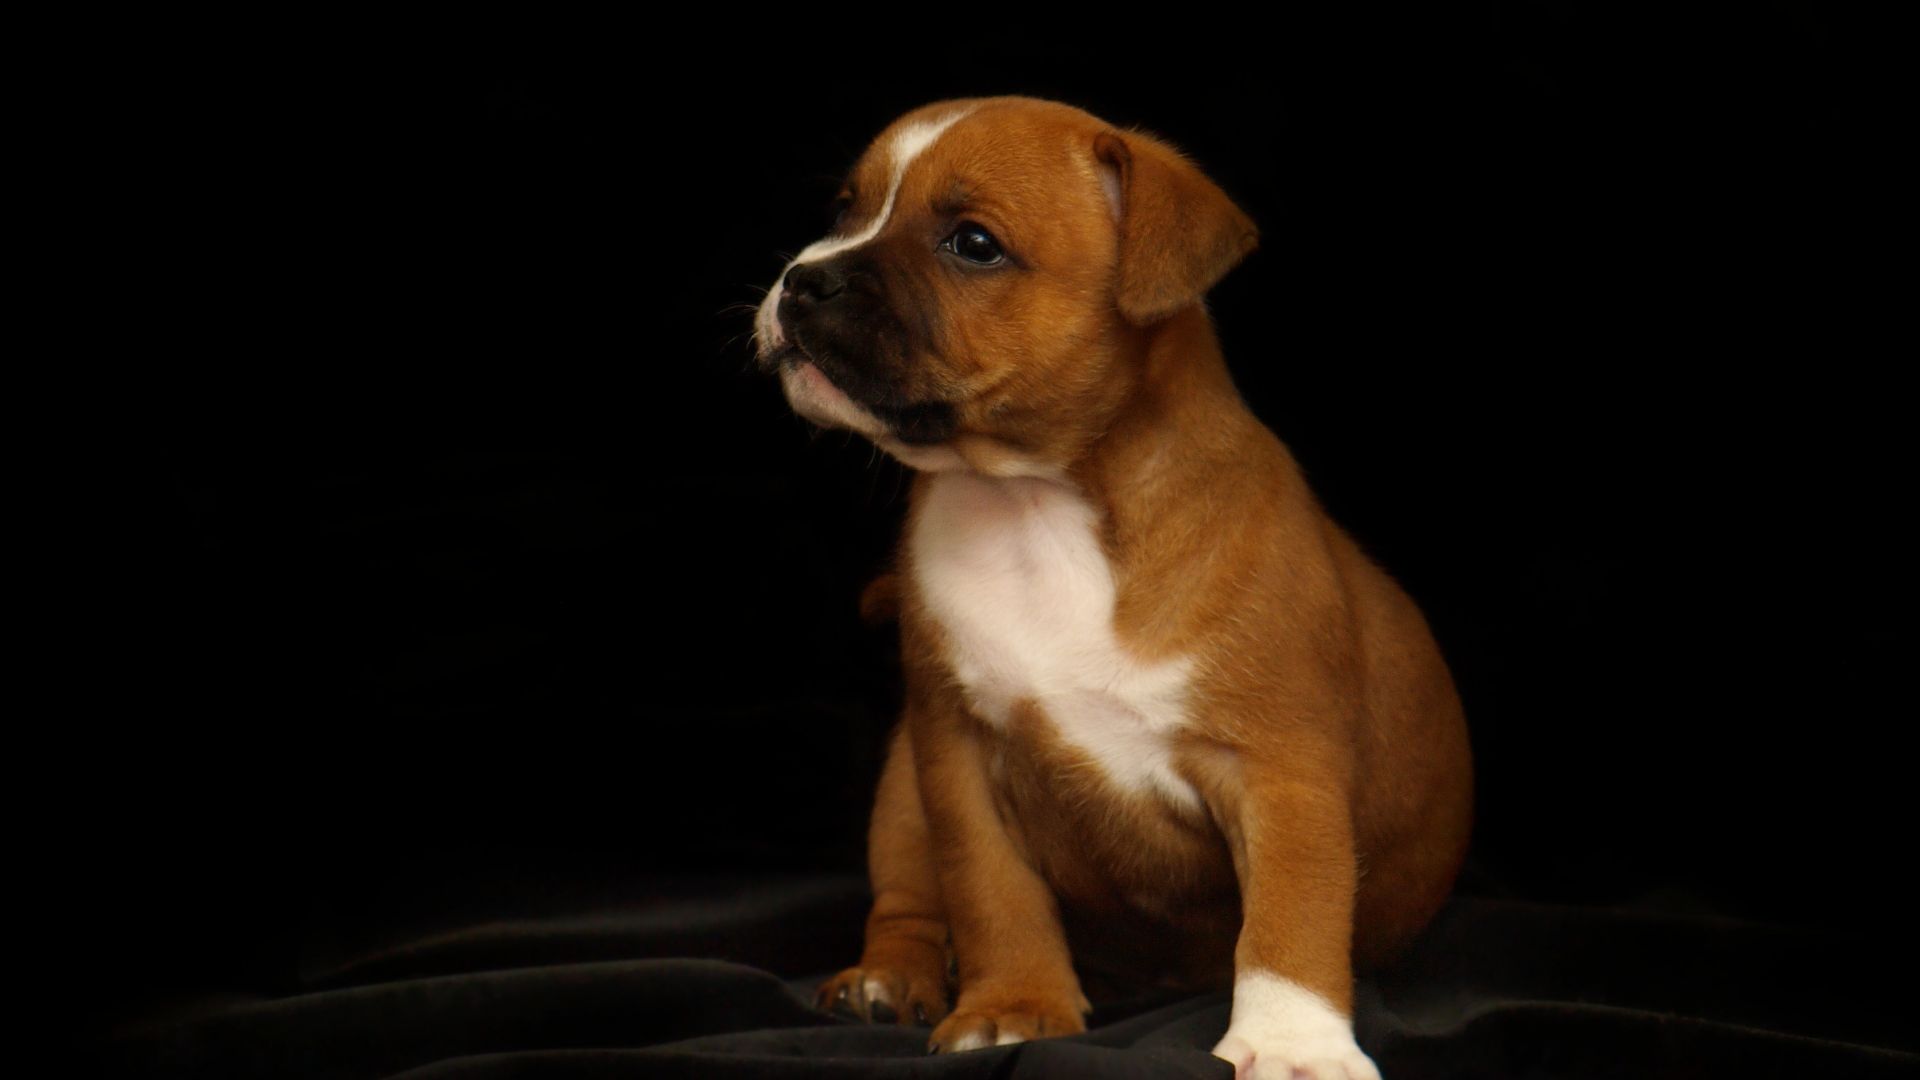 Wallpaper Puppy, Adorable, Staffordshire Bull Terrier dog